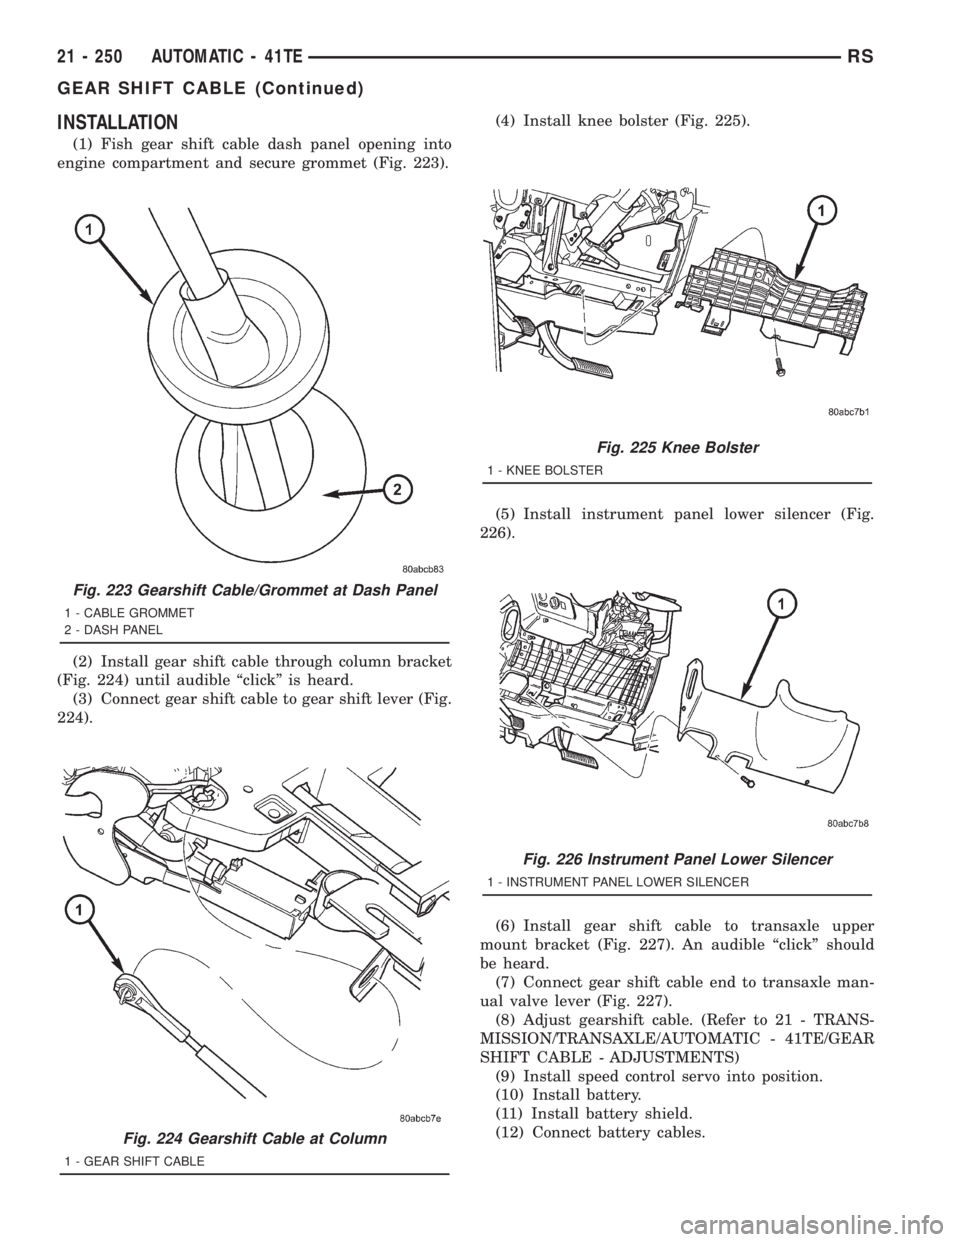 CHRYSLER VOYAGER 2001  Service Manual INSTALLATION
(1) Fish gear shift cable dash panel opening into
engine compartment and secure grommet (Fig. 223).
(2) Install gear shift cable through column bracket
(Fig. 224) until audible ªclickº 